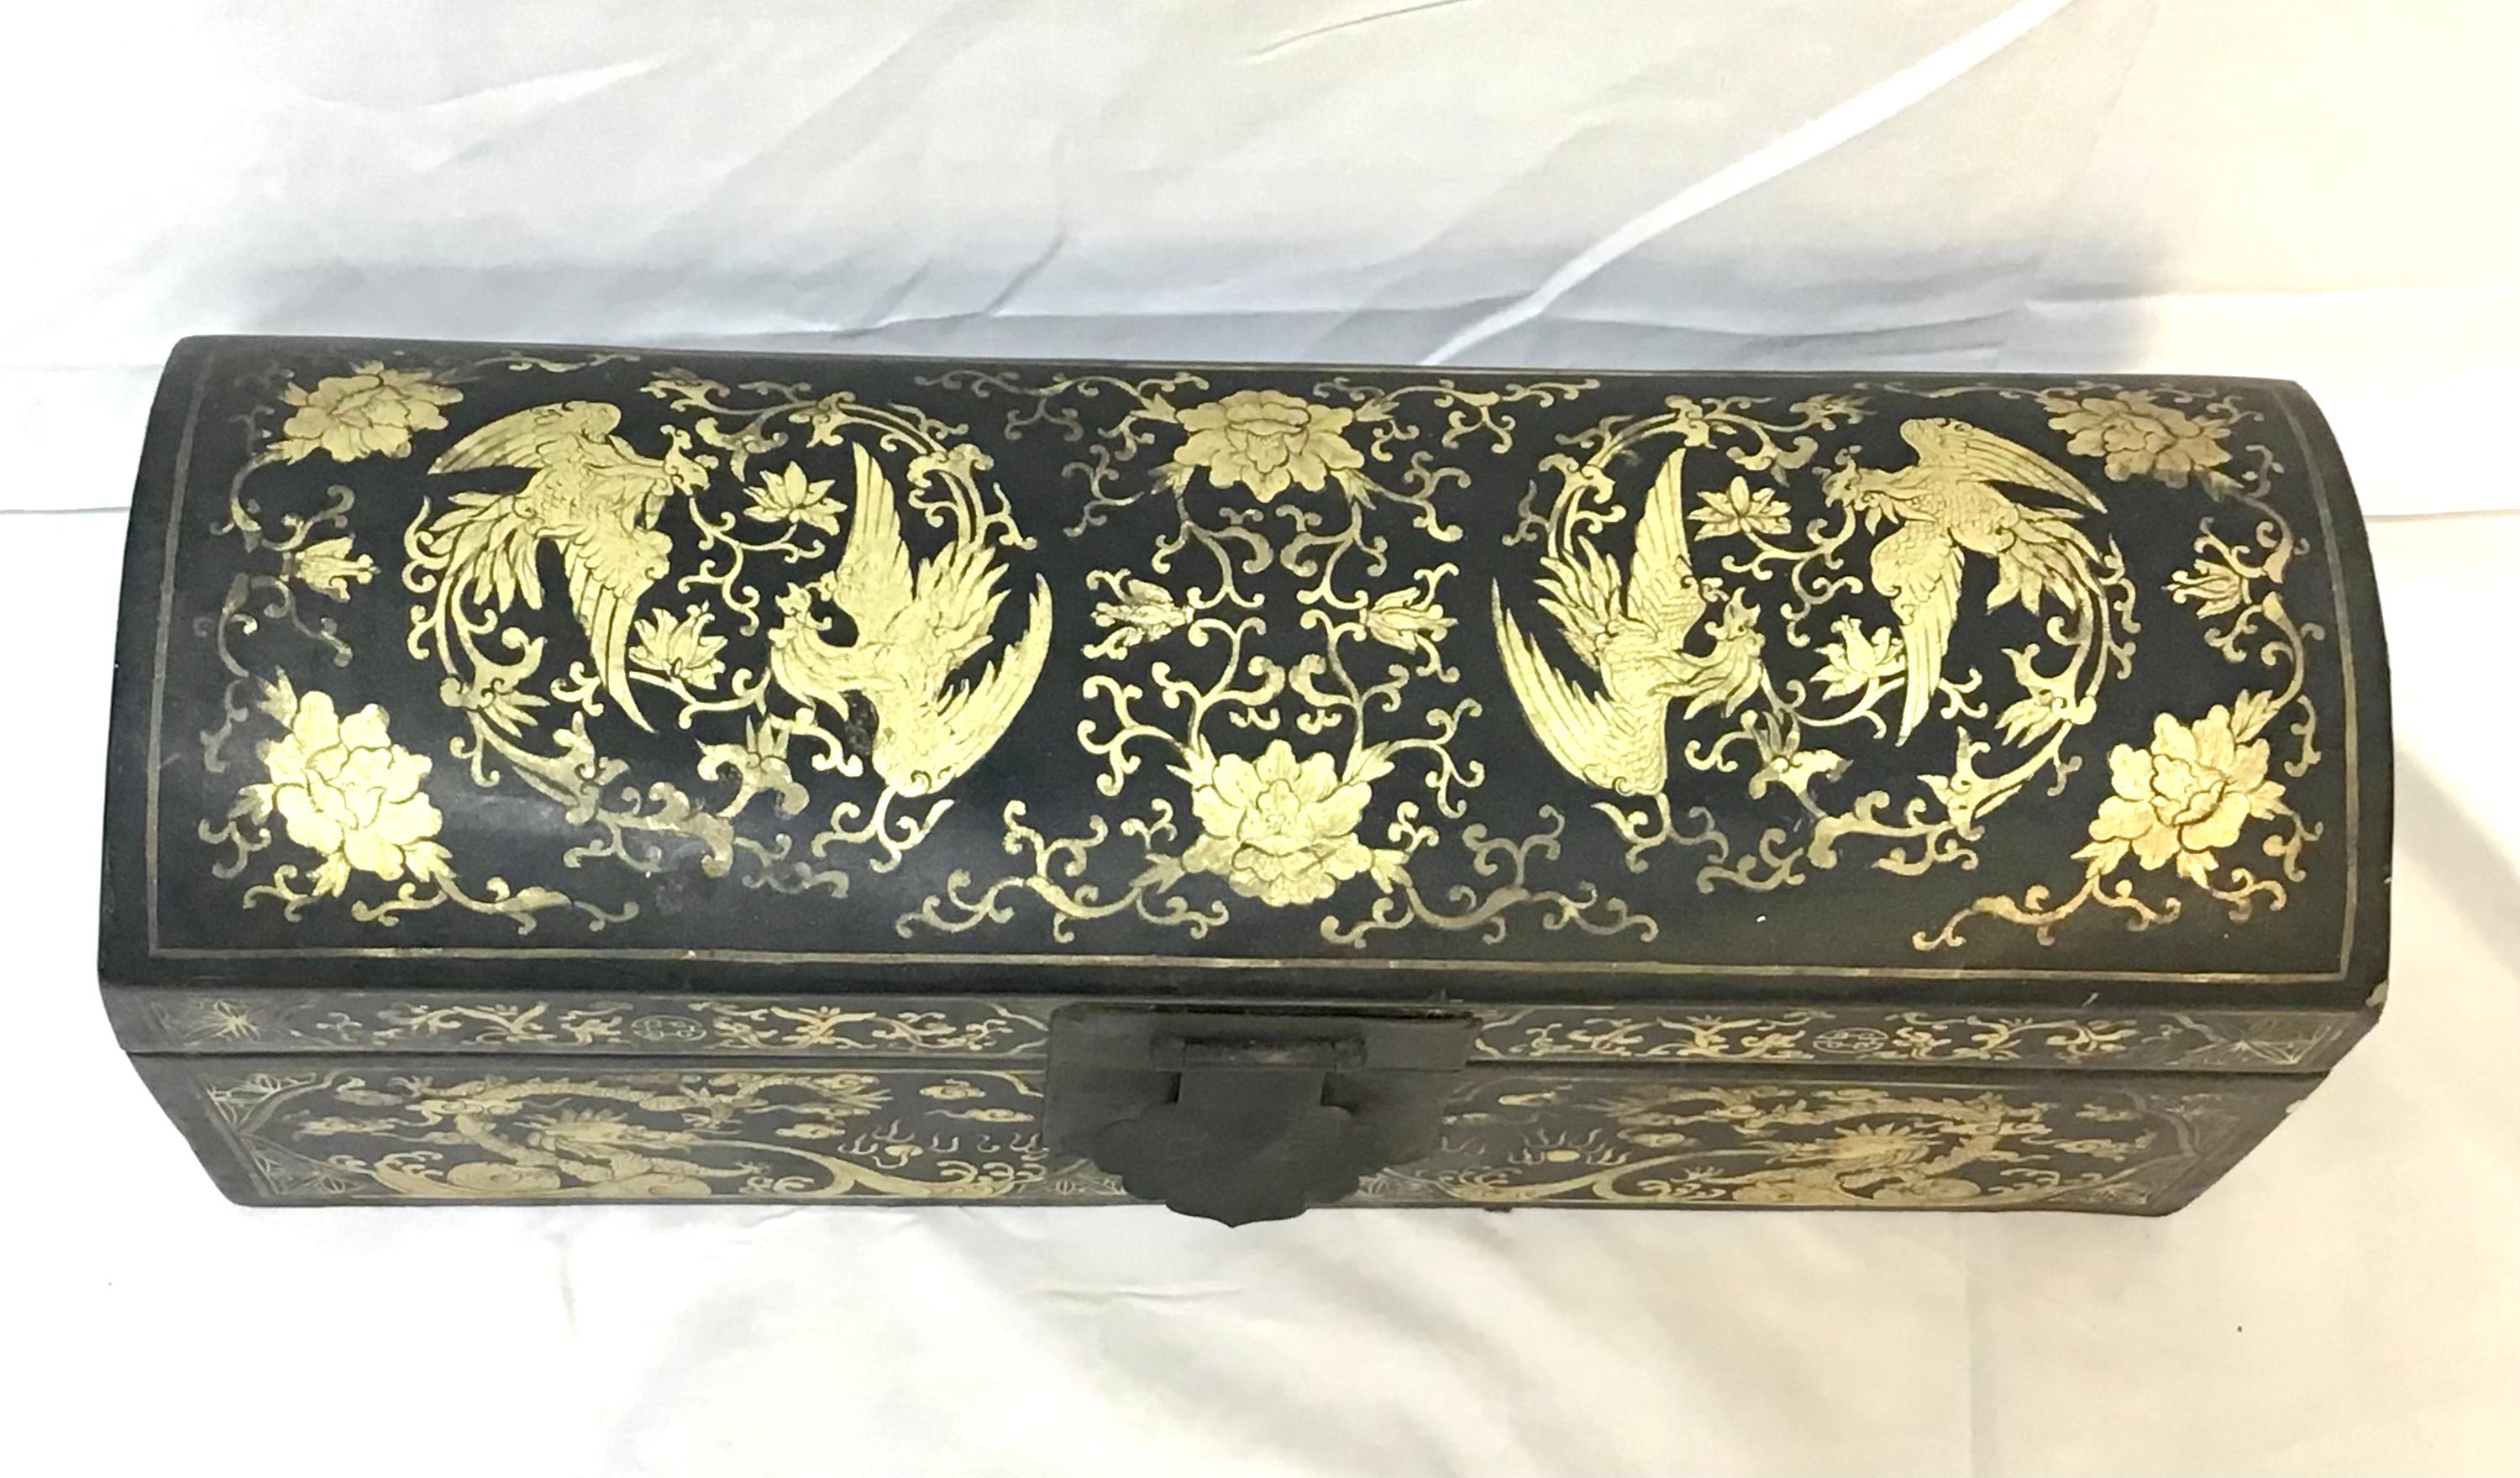 Early 1900's Antique gilt chinoiserie decorated hinged wooden pillow box originally used as a pillow and a place to store ones valuables while sleeping. The box features fine gilt decoration with a curved top, two brass handles and a brass lock